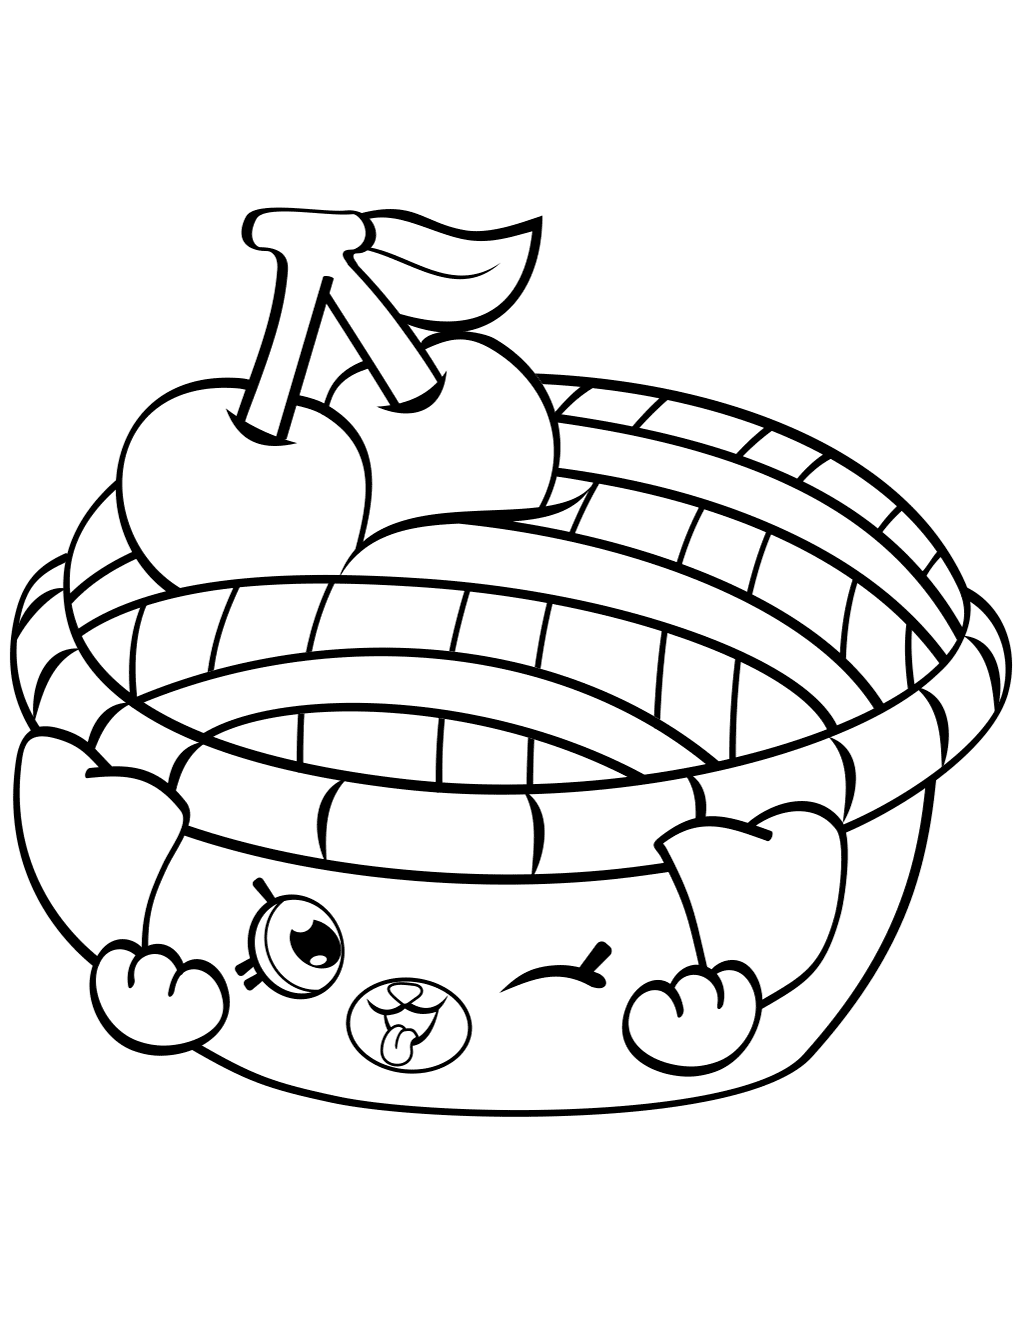 Shy Pie Shopkin from Season 4 Coloring Page